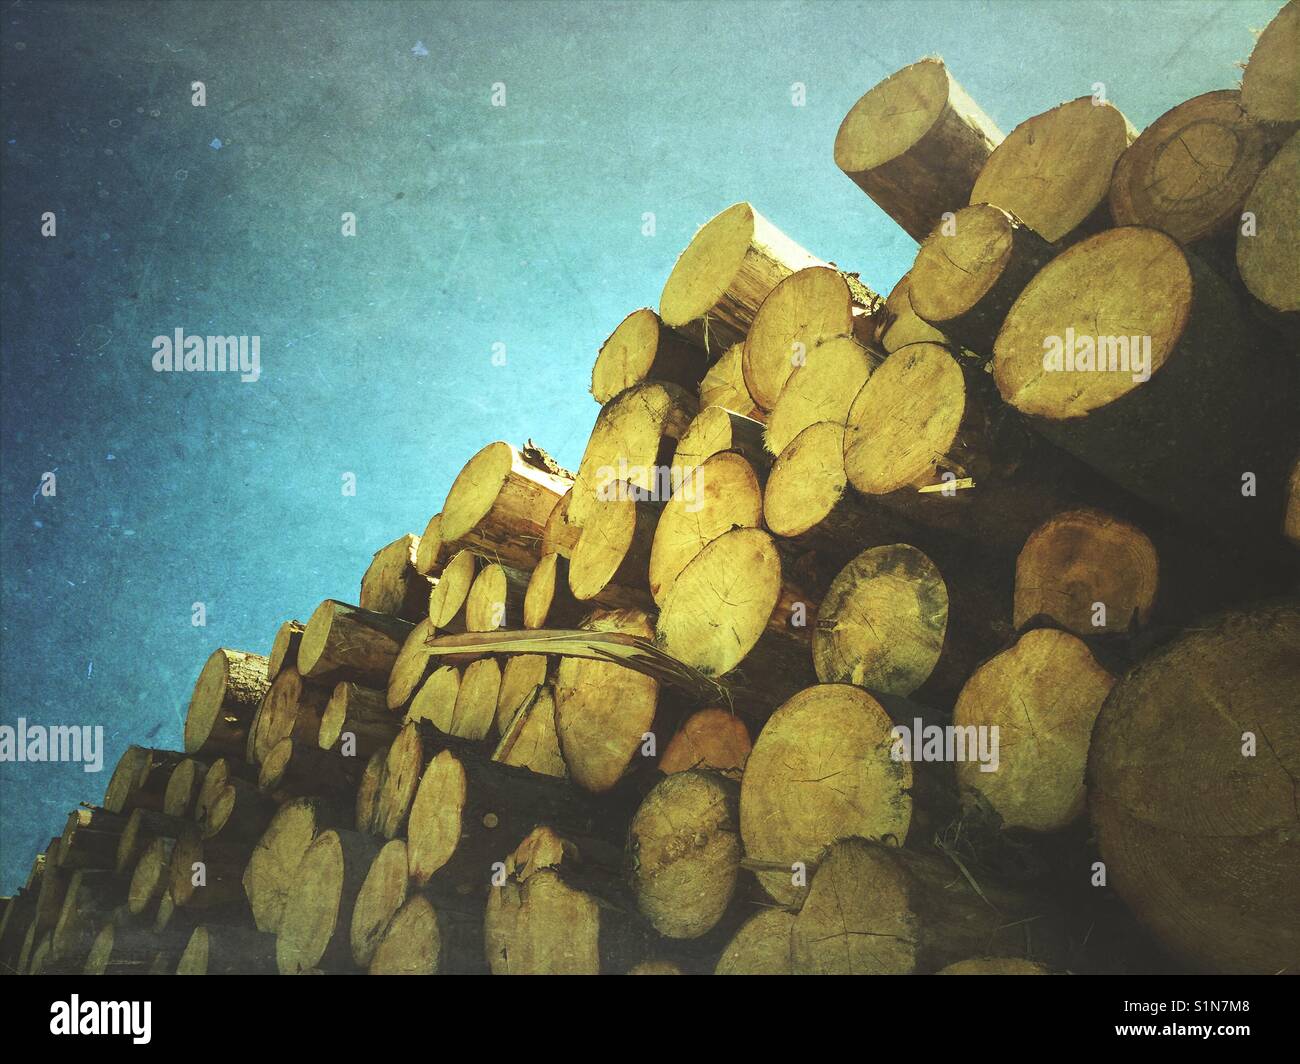 Stack of timber, tree trunks Stock Photo